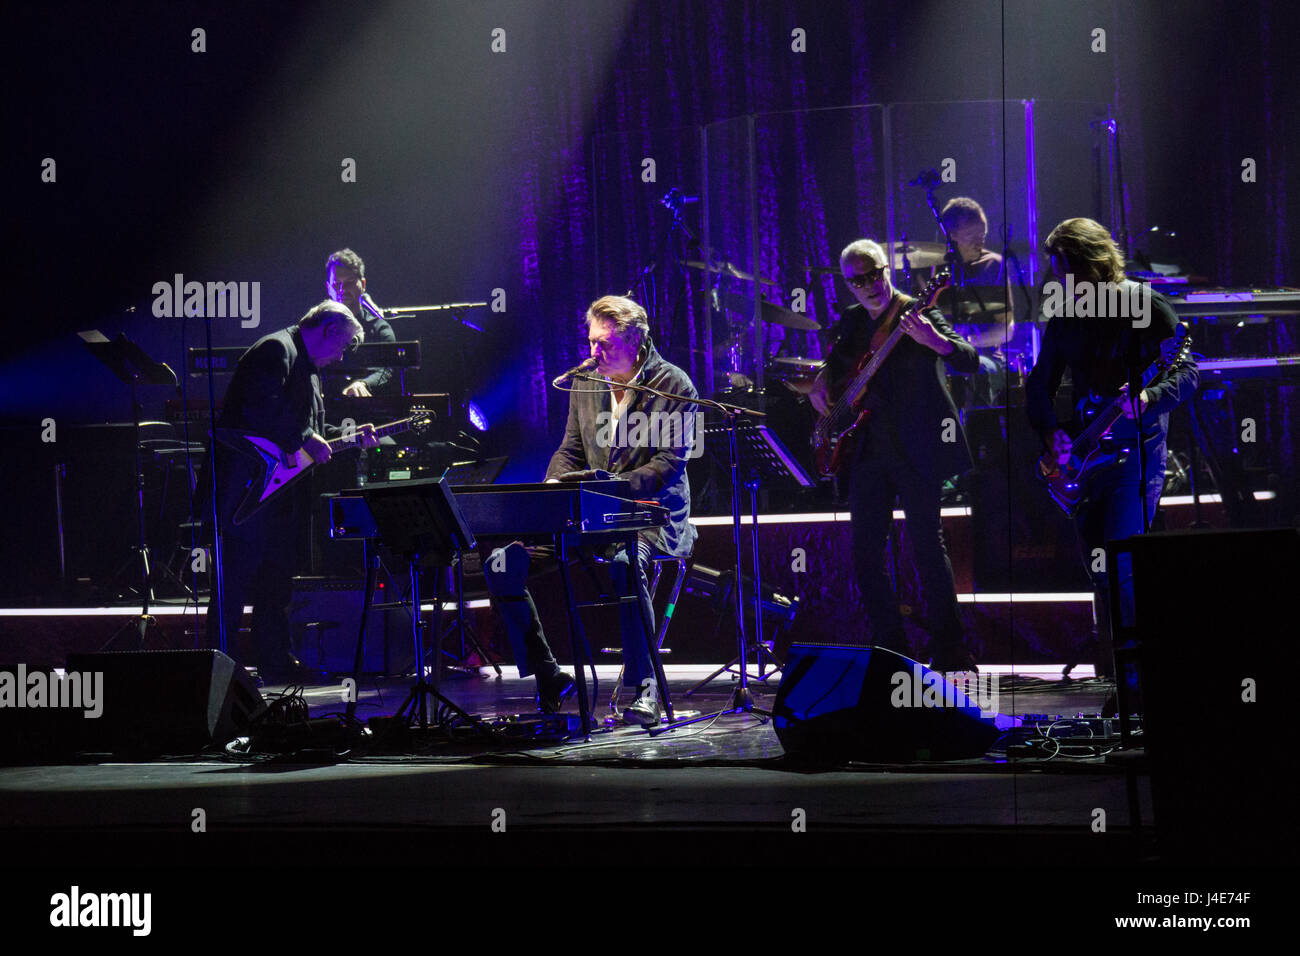 Milan Italy. 11th May 2017. The English singer-songwriter BRYAN FERRY performs live on stage at Teatro Degli Arcimboldi during the 'World Tour 2017' Credit: Rodolfo Sassano/Alamy Live News Stock Photo